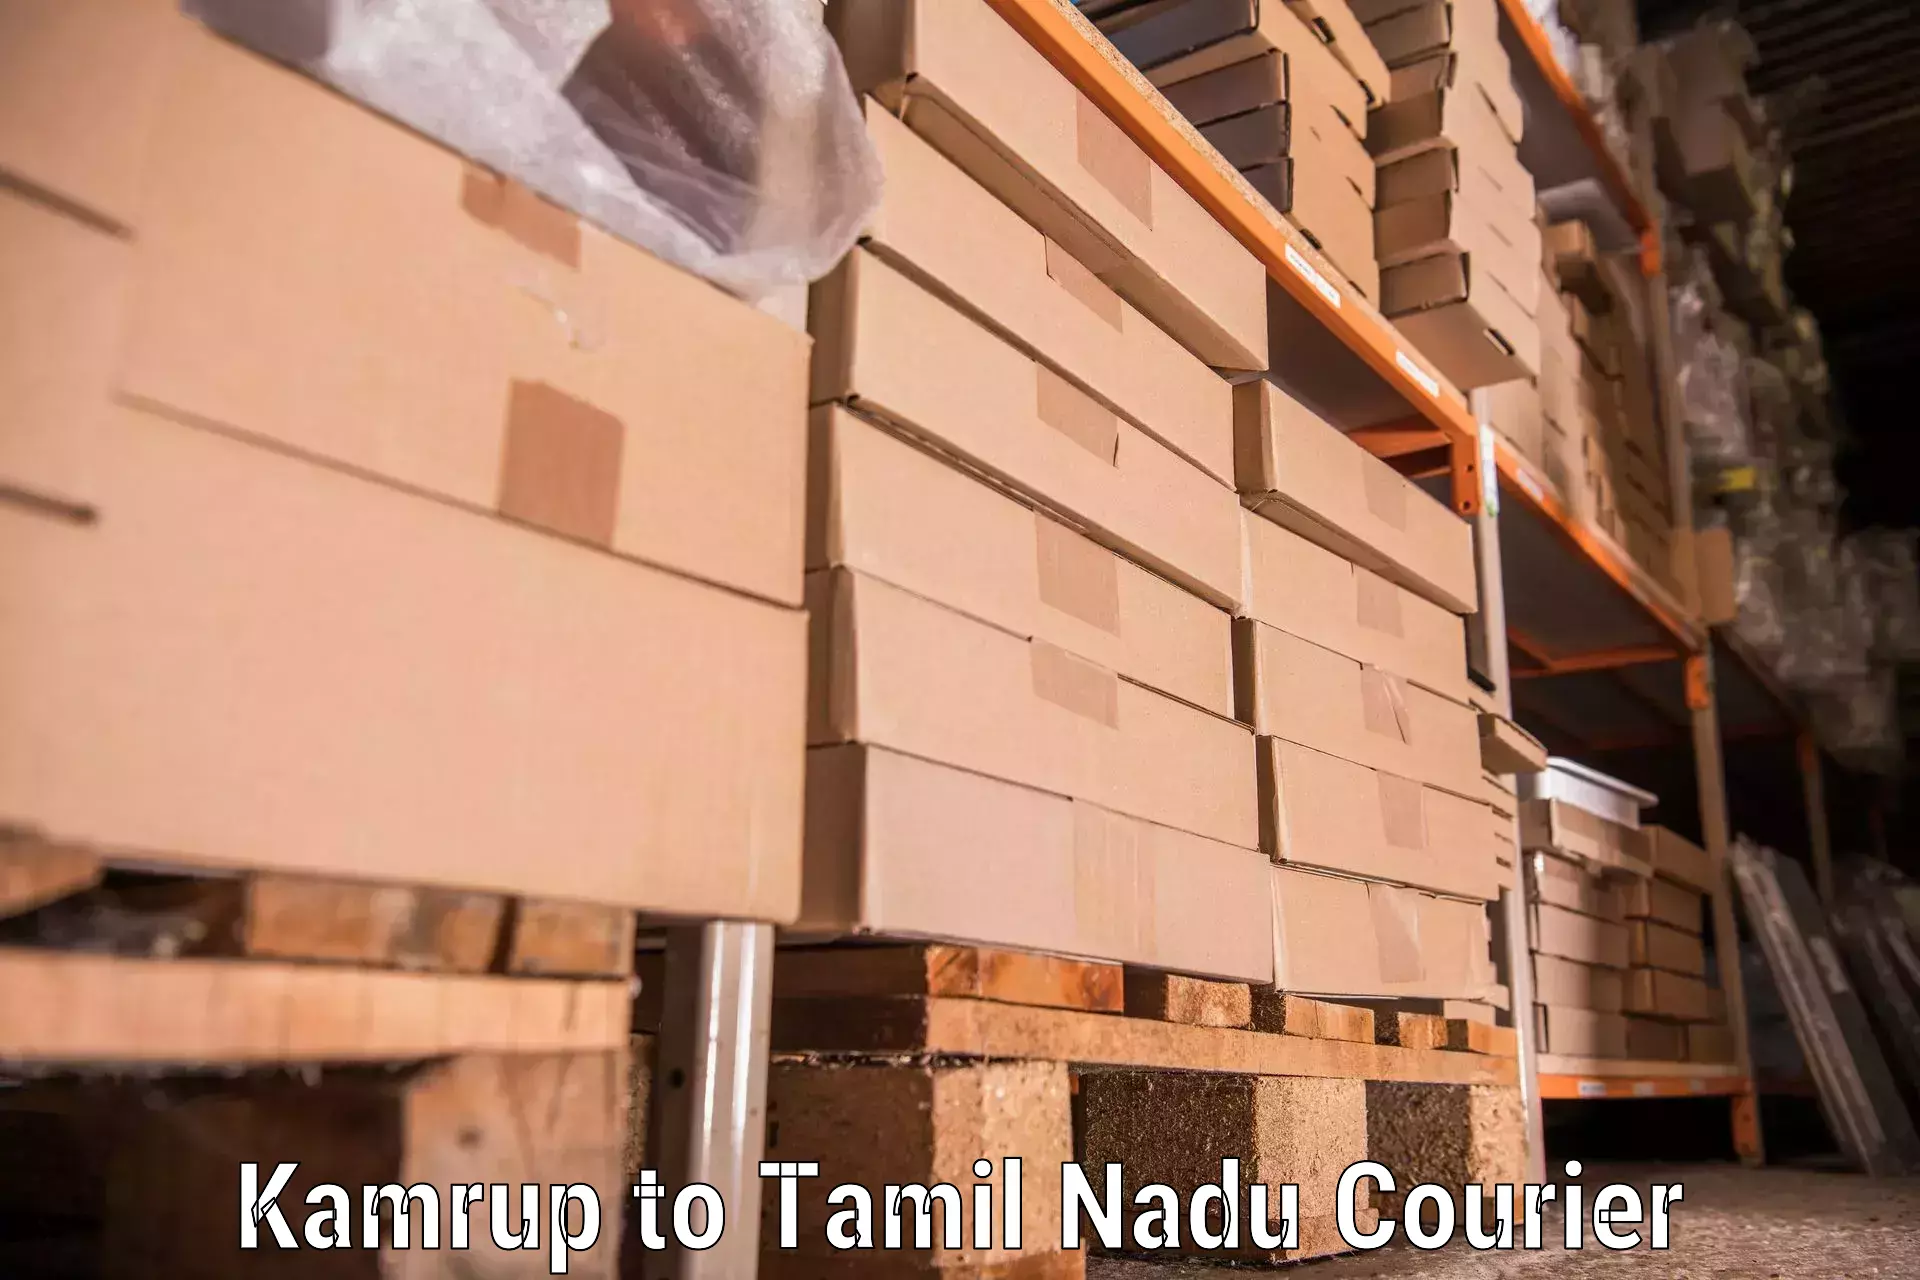 Home moving specialists Kamrup to Tirunelveli